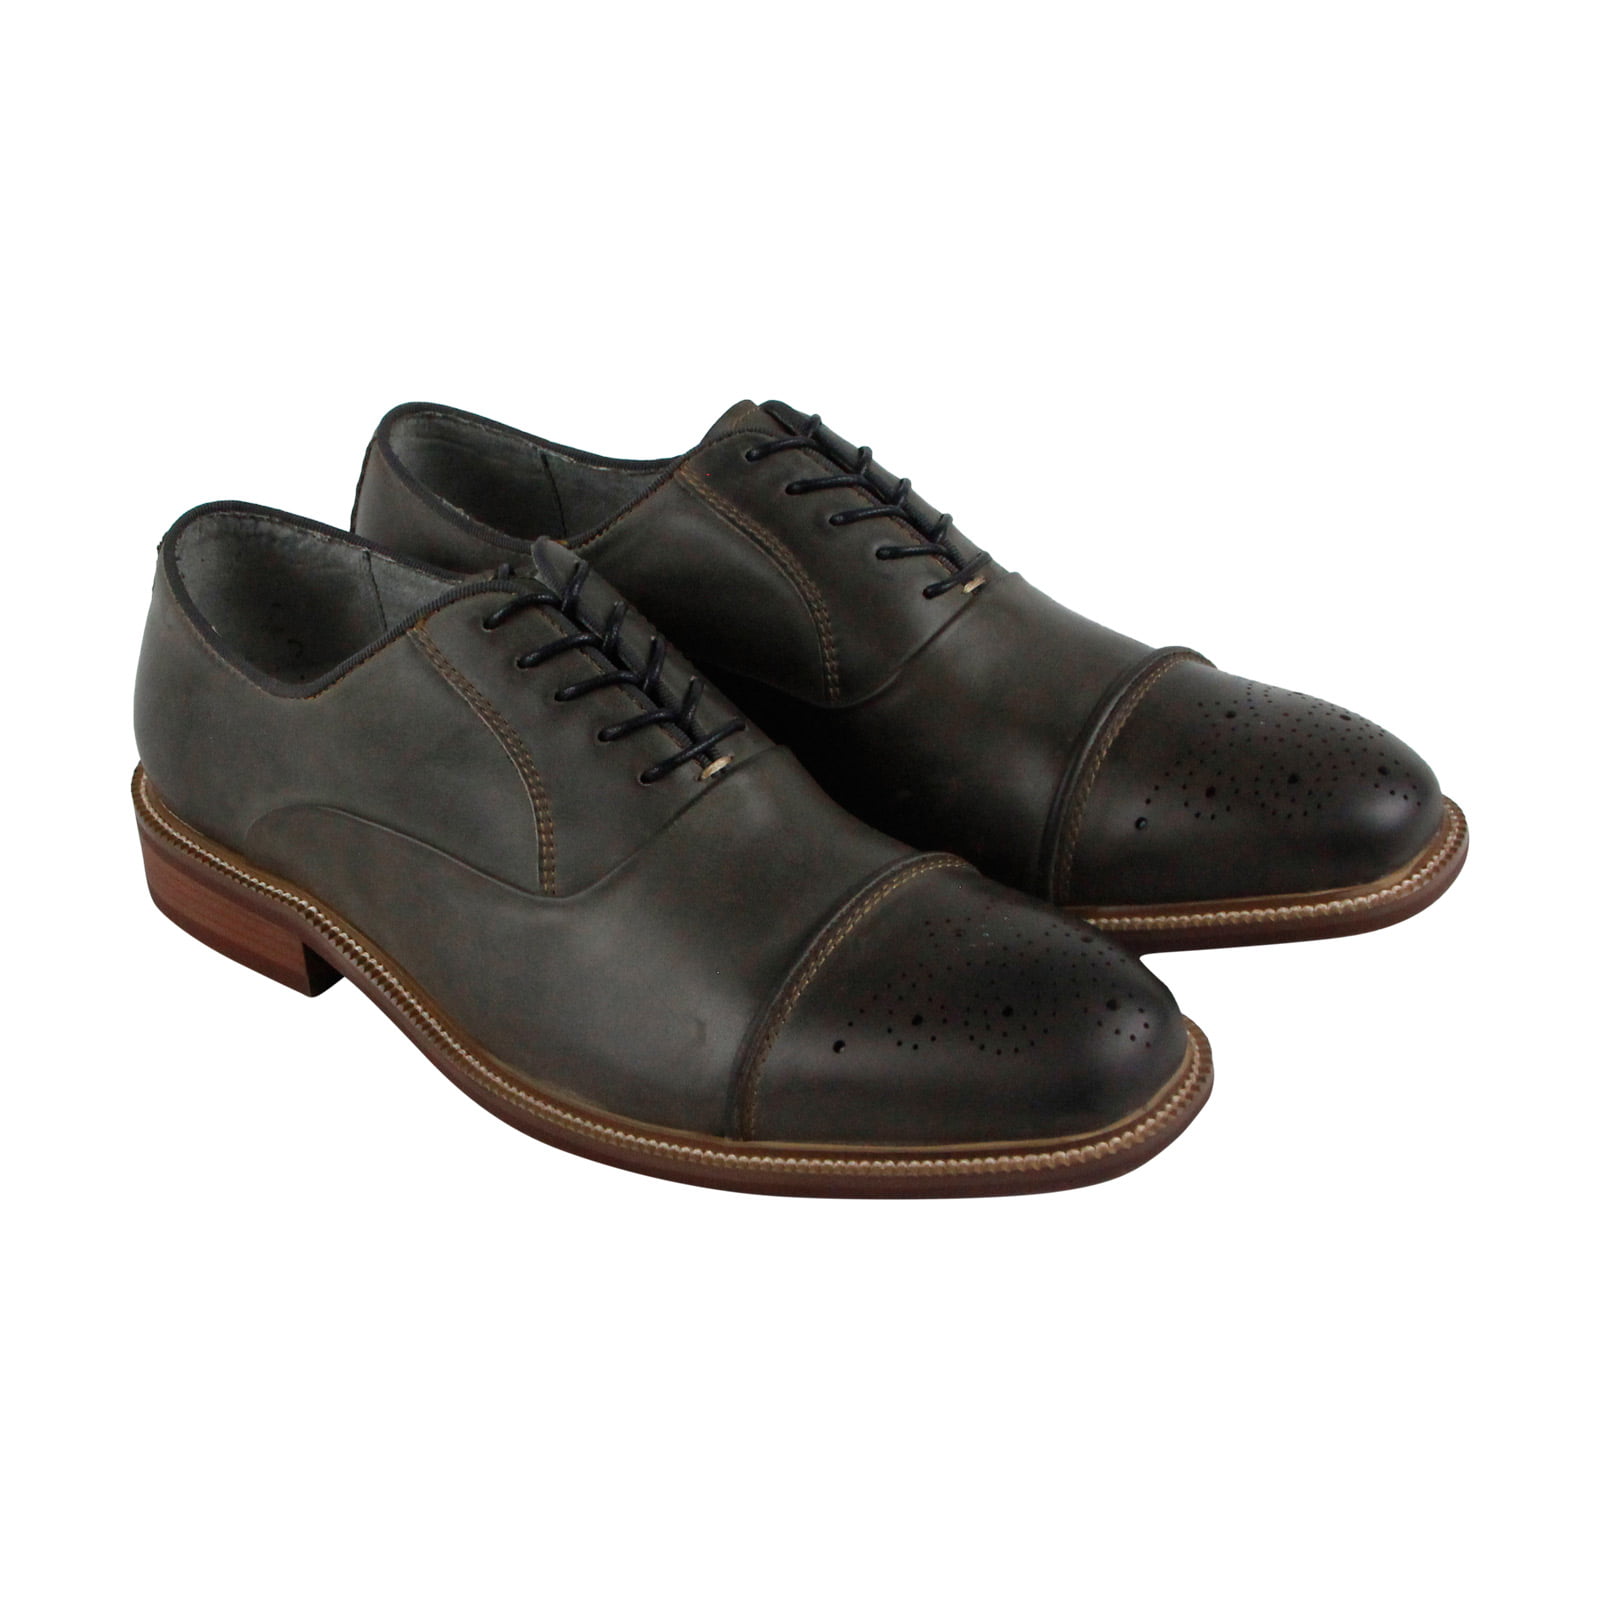 Kenneth Cole - Kenneth Cole New York Stoan Oxford Mens Gray Casual ...